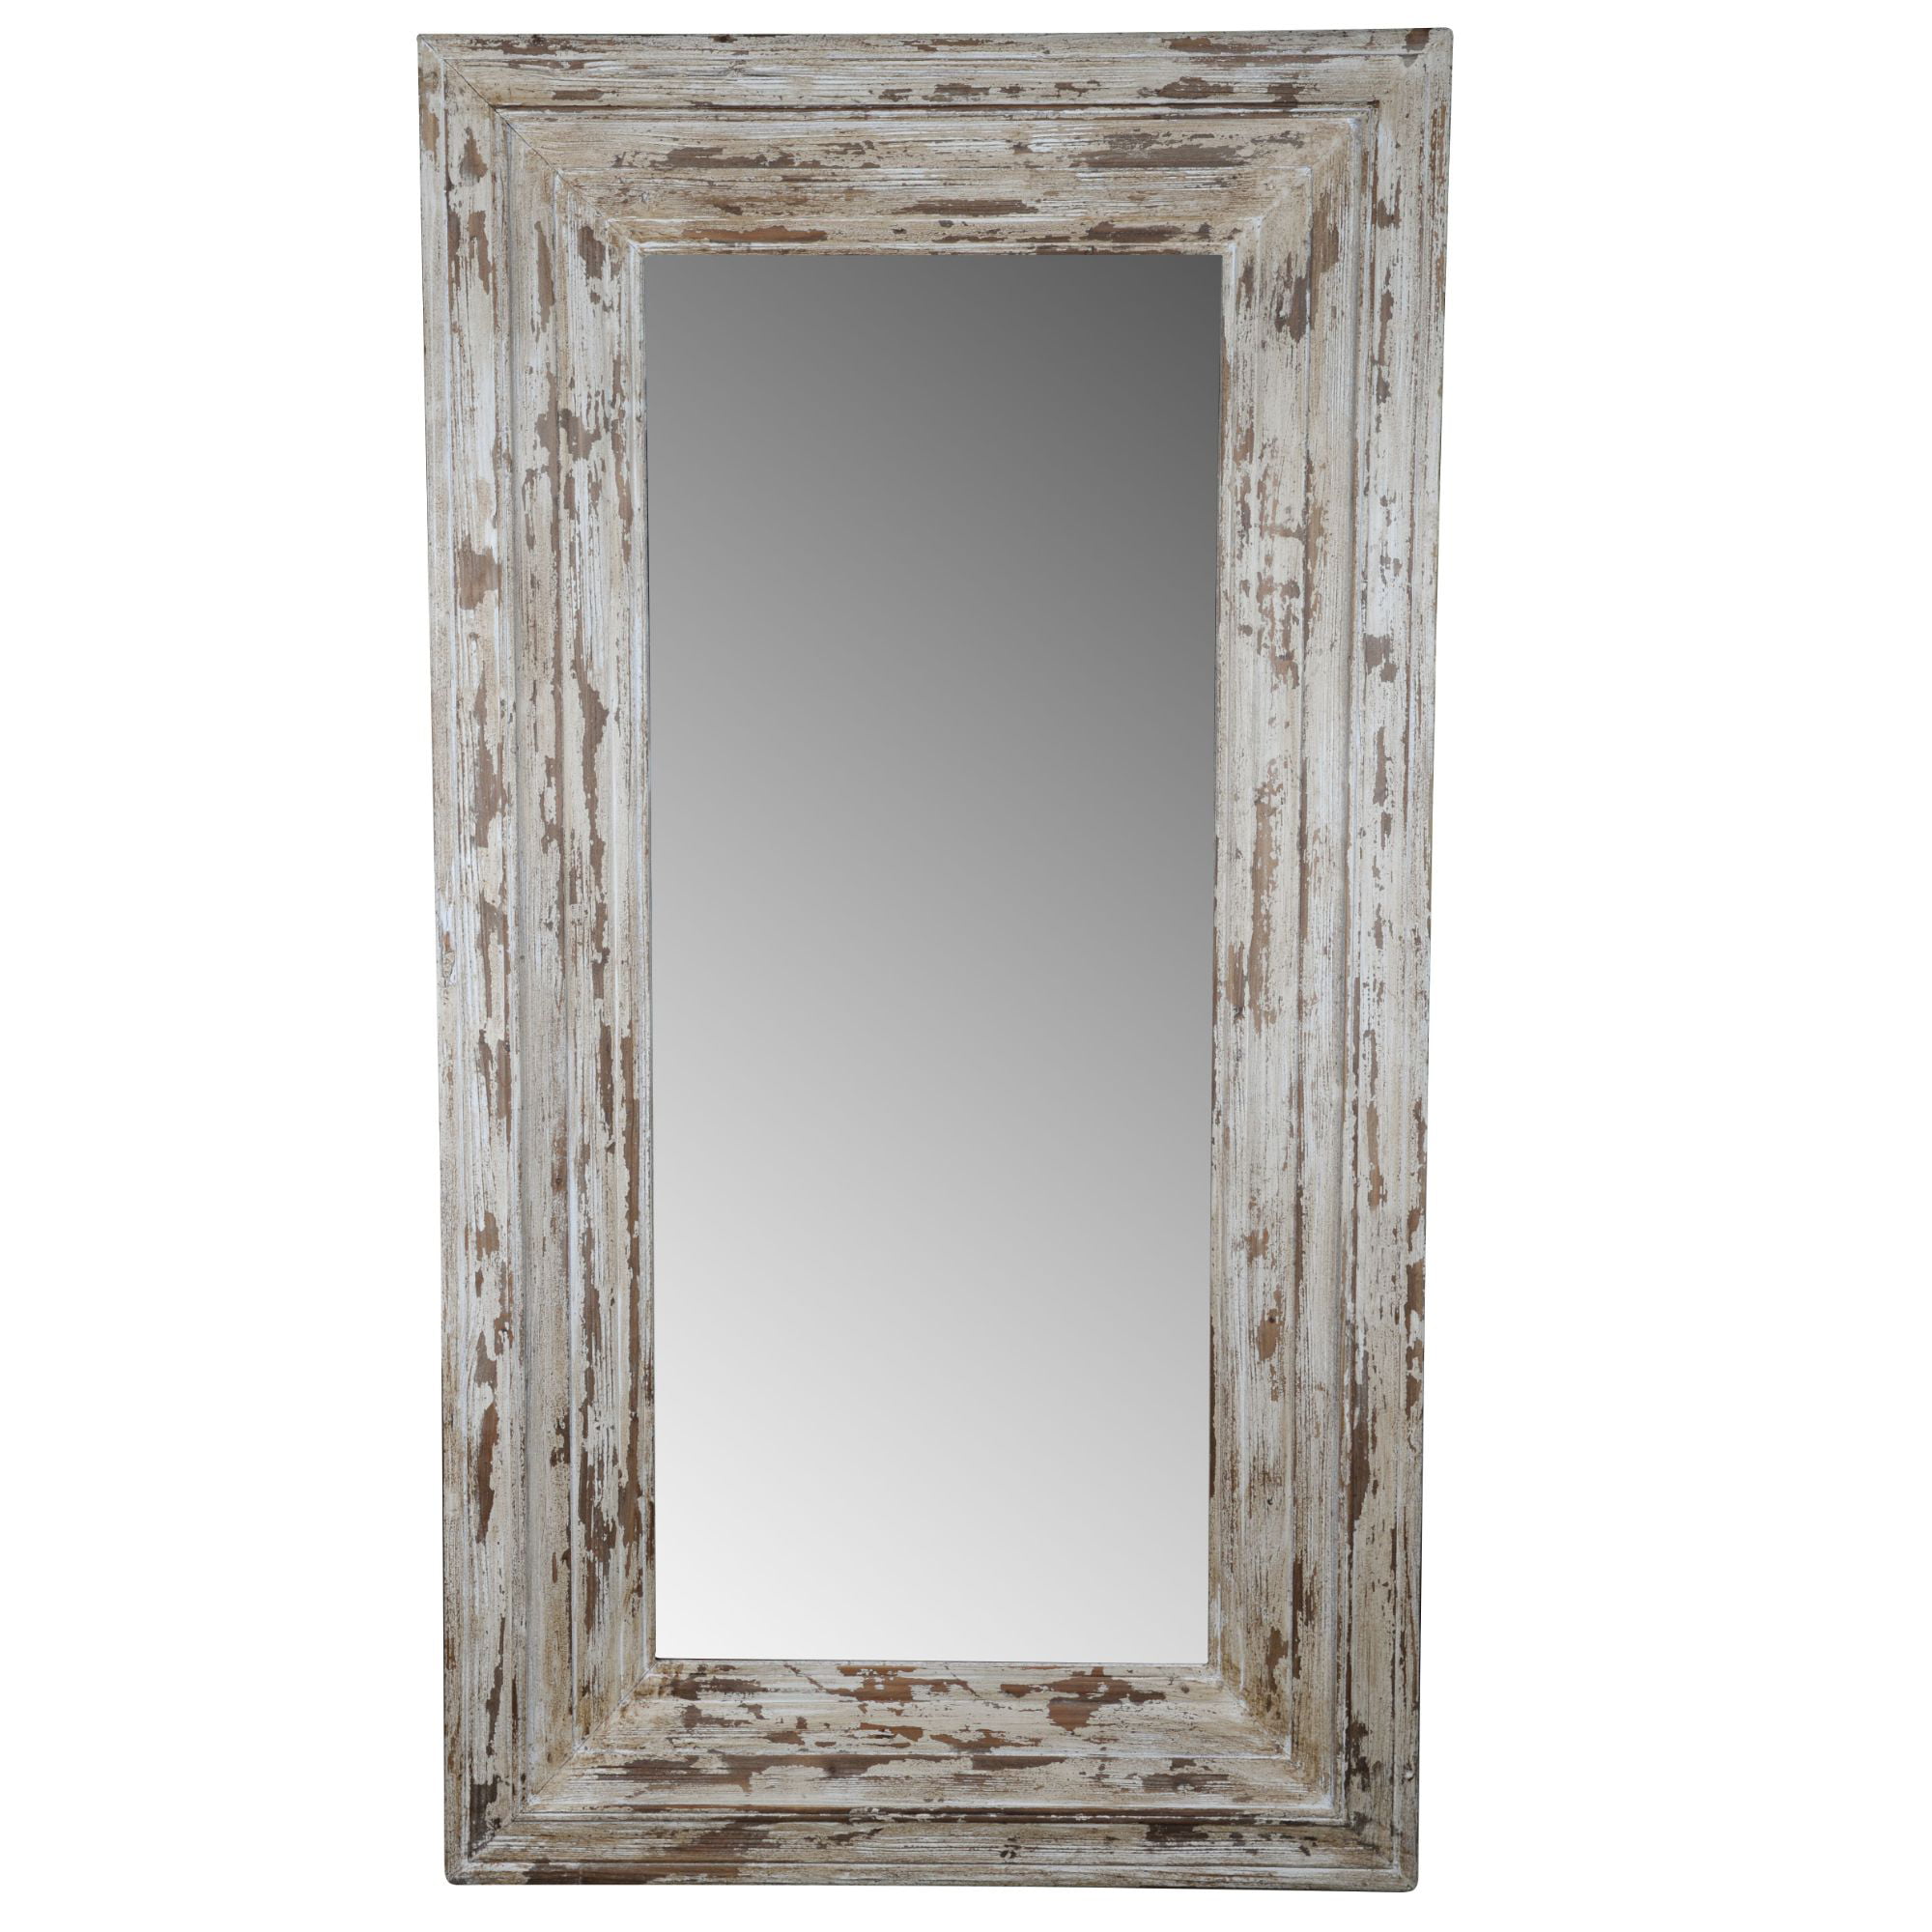 Distressed Floor Mirror: A Reflection Of Timeless Beauty